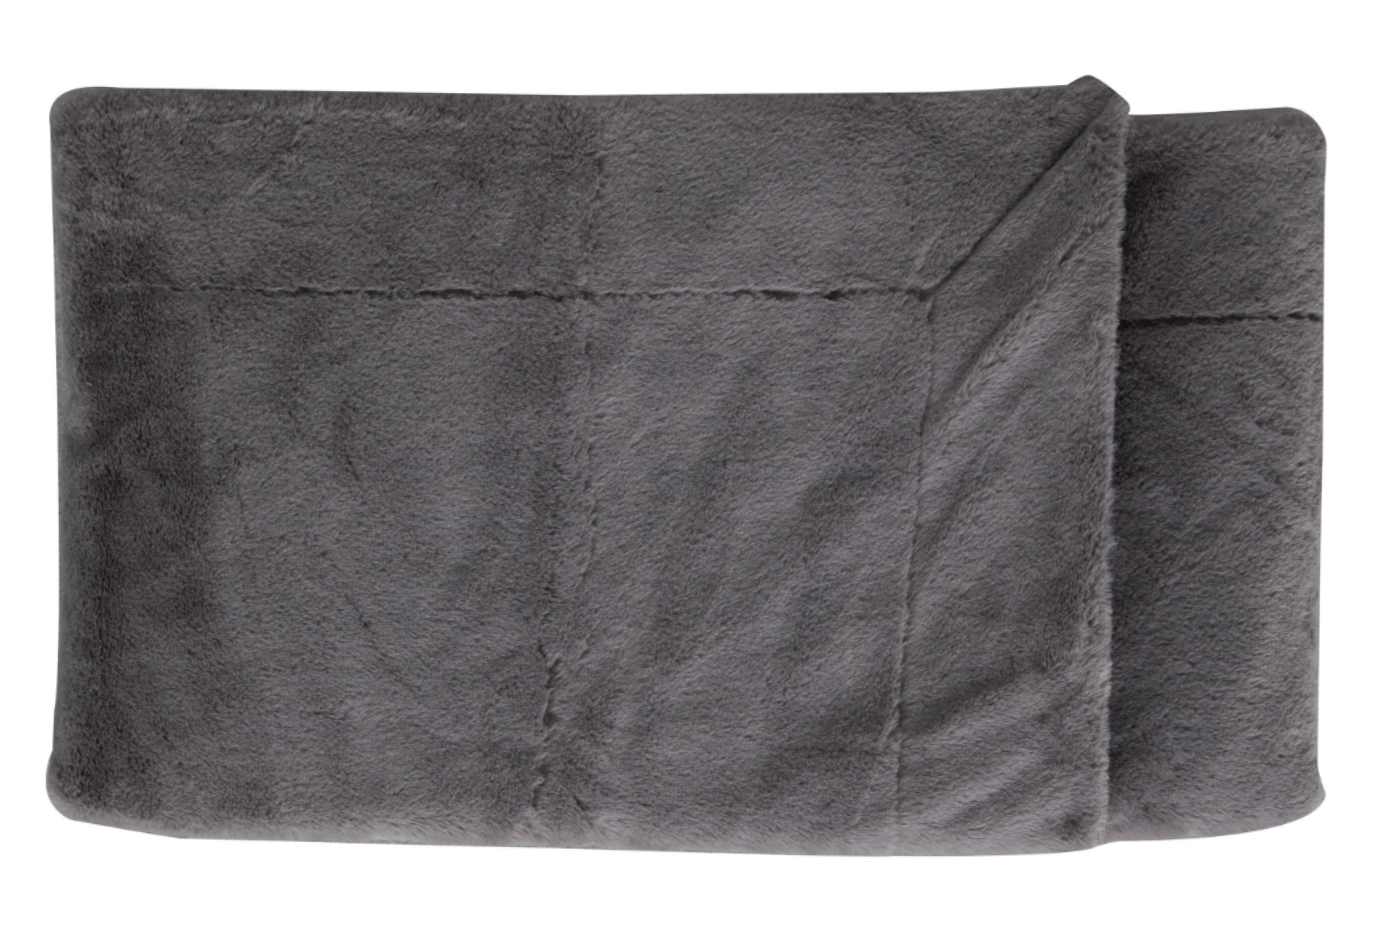 View Mid Grey Faux Fur Throw With Stitched Fold Over Border Large information